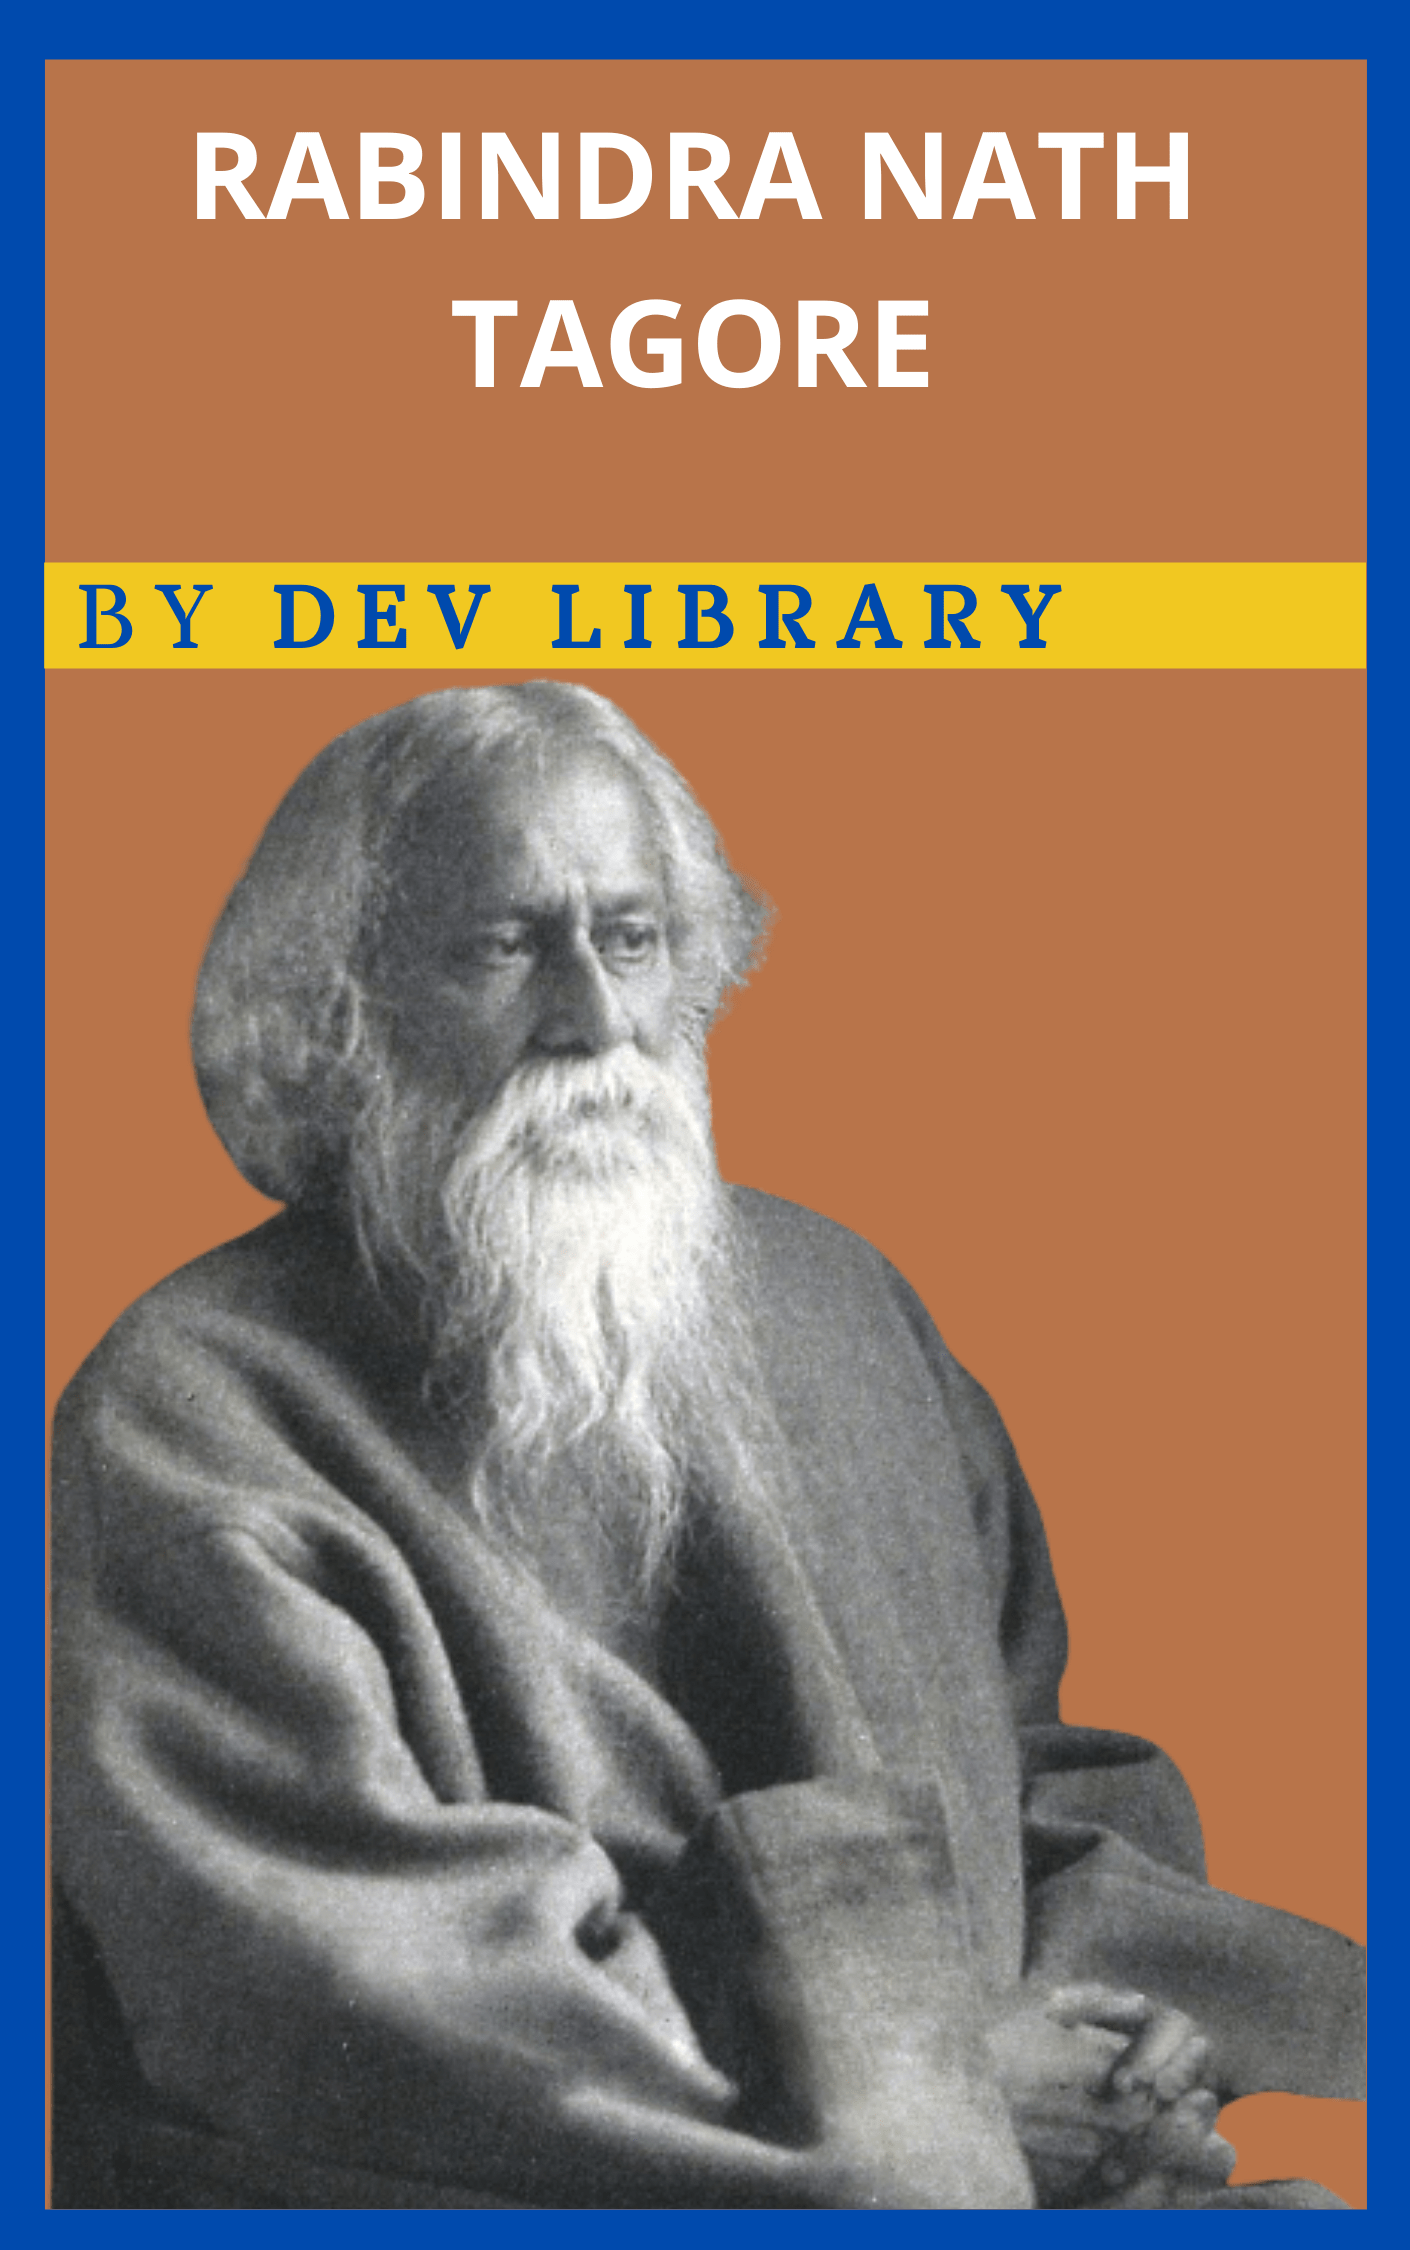 biography of rabindranath tagore in 300 words